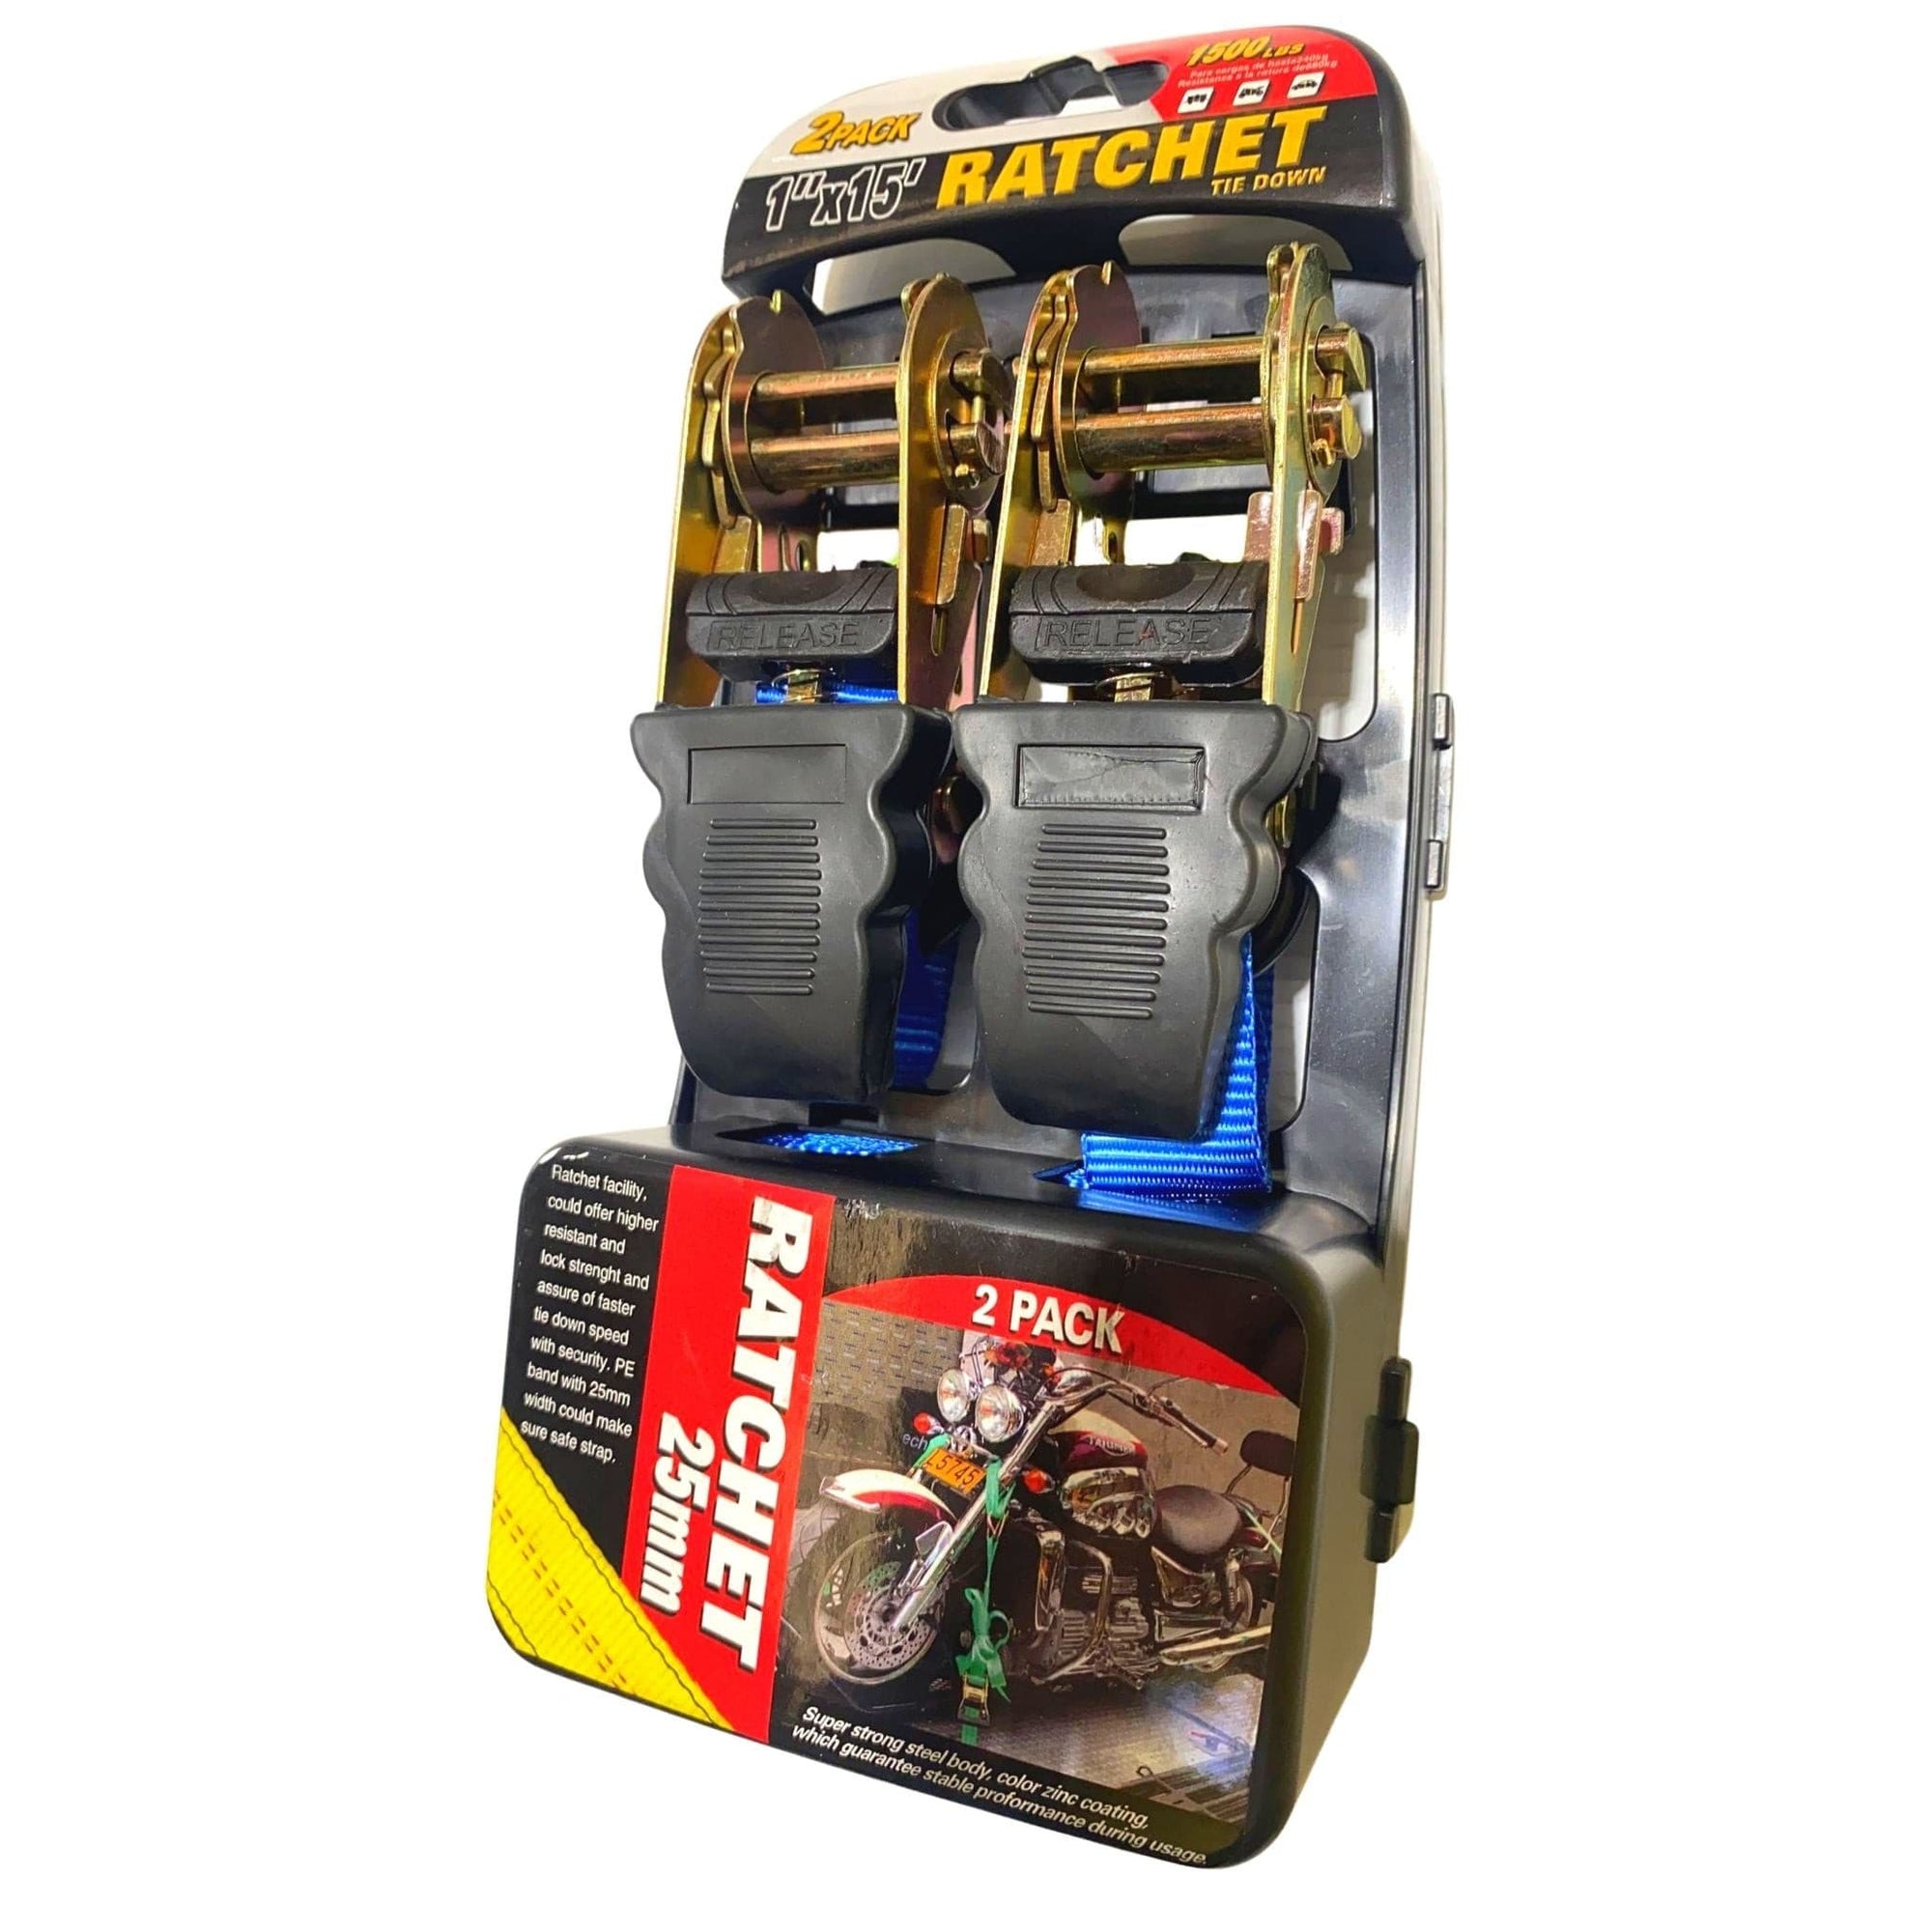 Heavy duty ratchet straps twin pack (1" X 15') - South East Clearance Centre